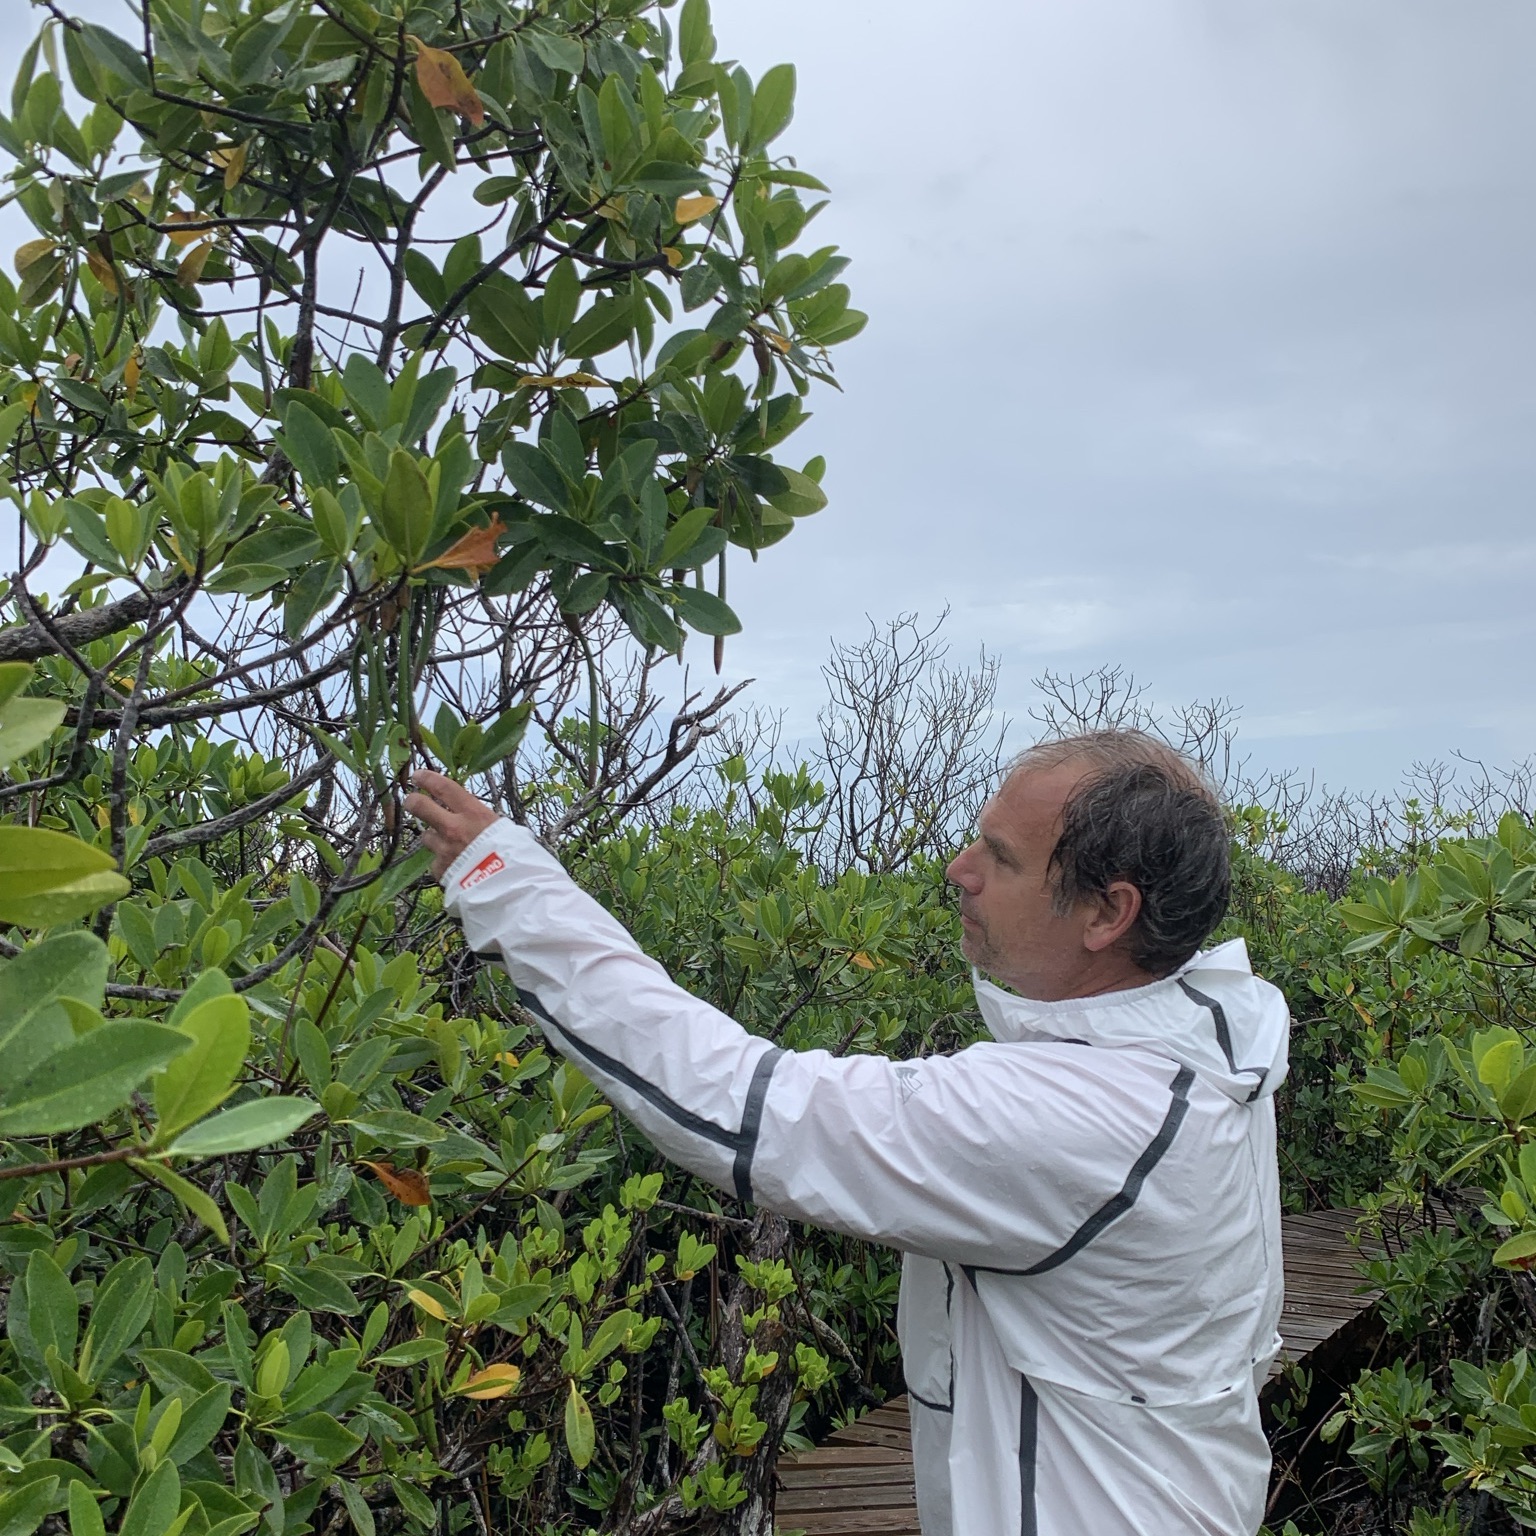 Just over a year after Hurricane Dorian, I am inspecting the mangroves that were damaged by the severe Category 5 storm.